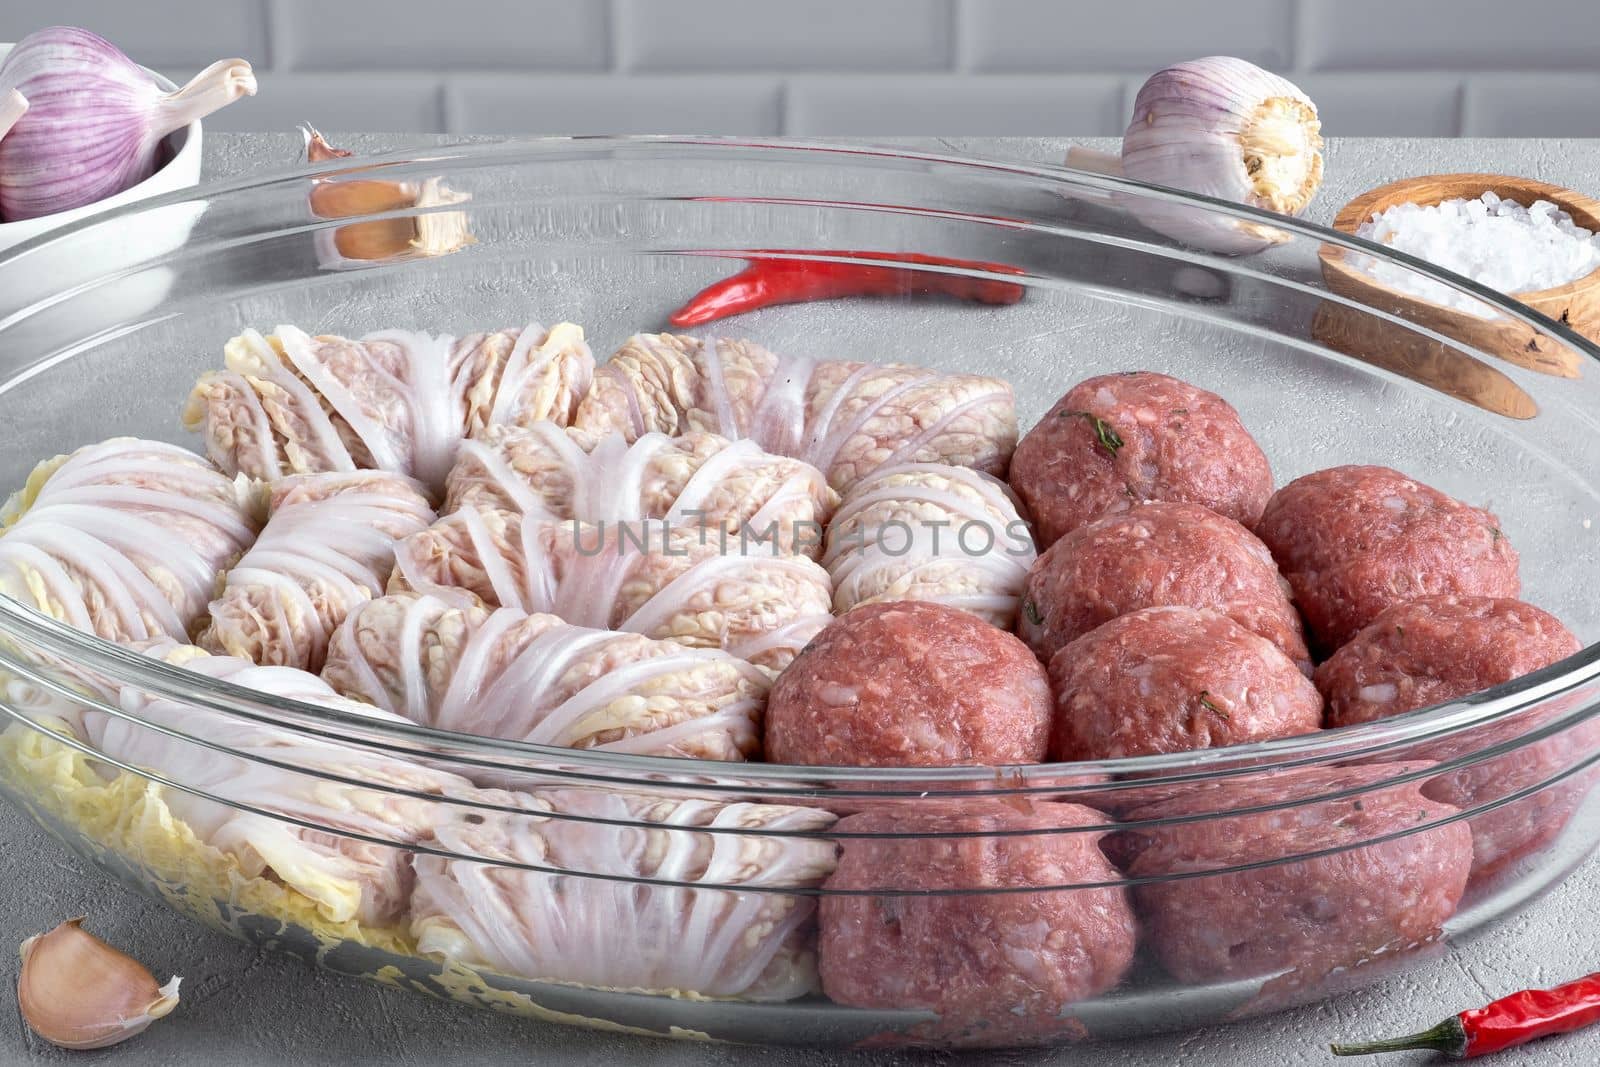 Meatballs and cabbage rolls with Chinese cabbage prepared for baking in the oven on a glass tray on the kitchen table. Healthy food. Selective focus.